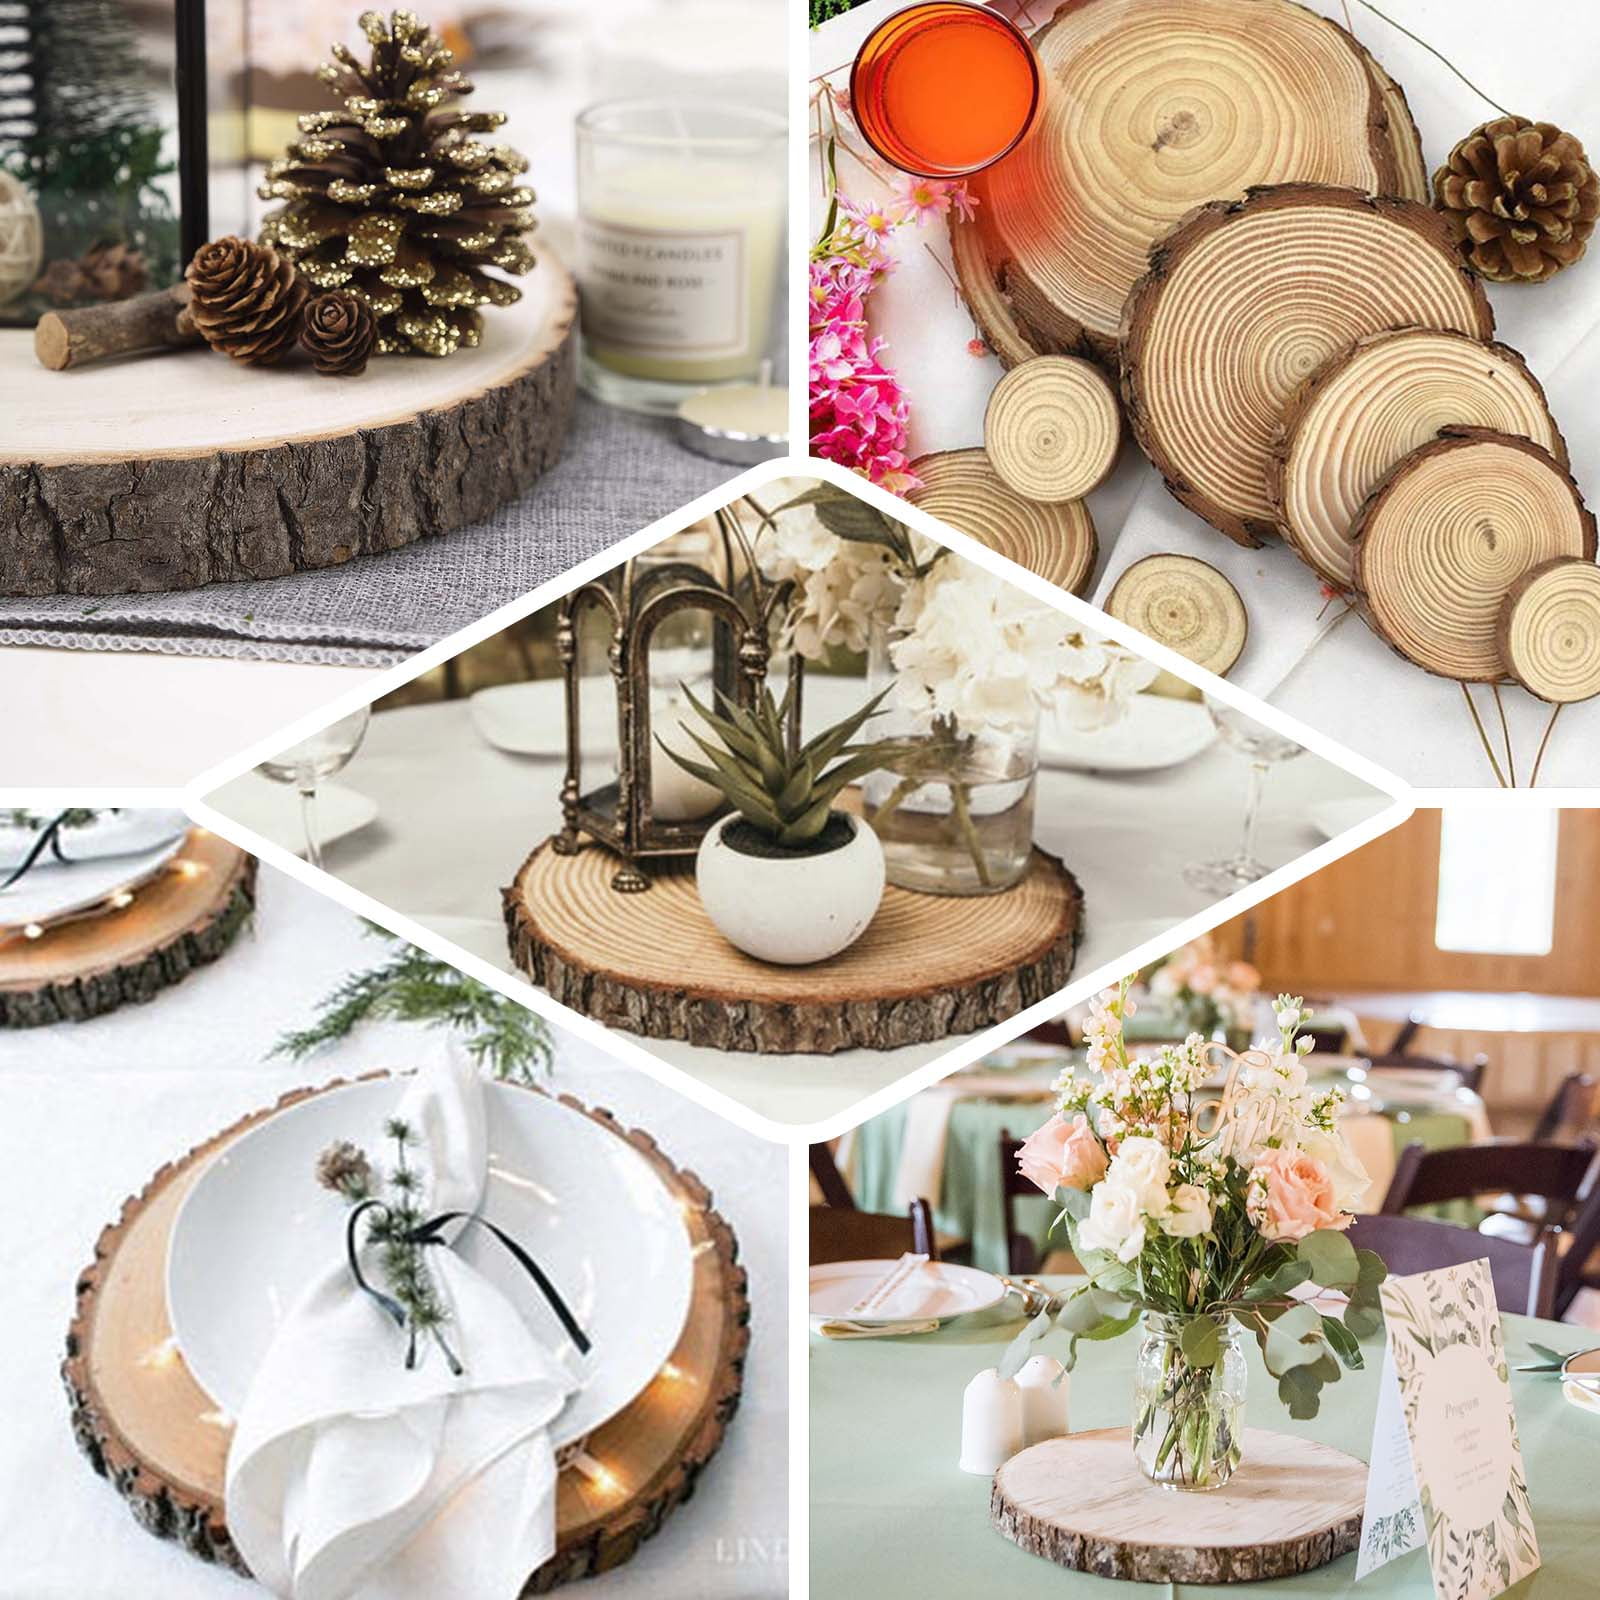 10 pieces: 6-8 wood slabs, shower or wedding decor, centerpiece, rustic.